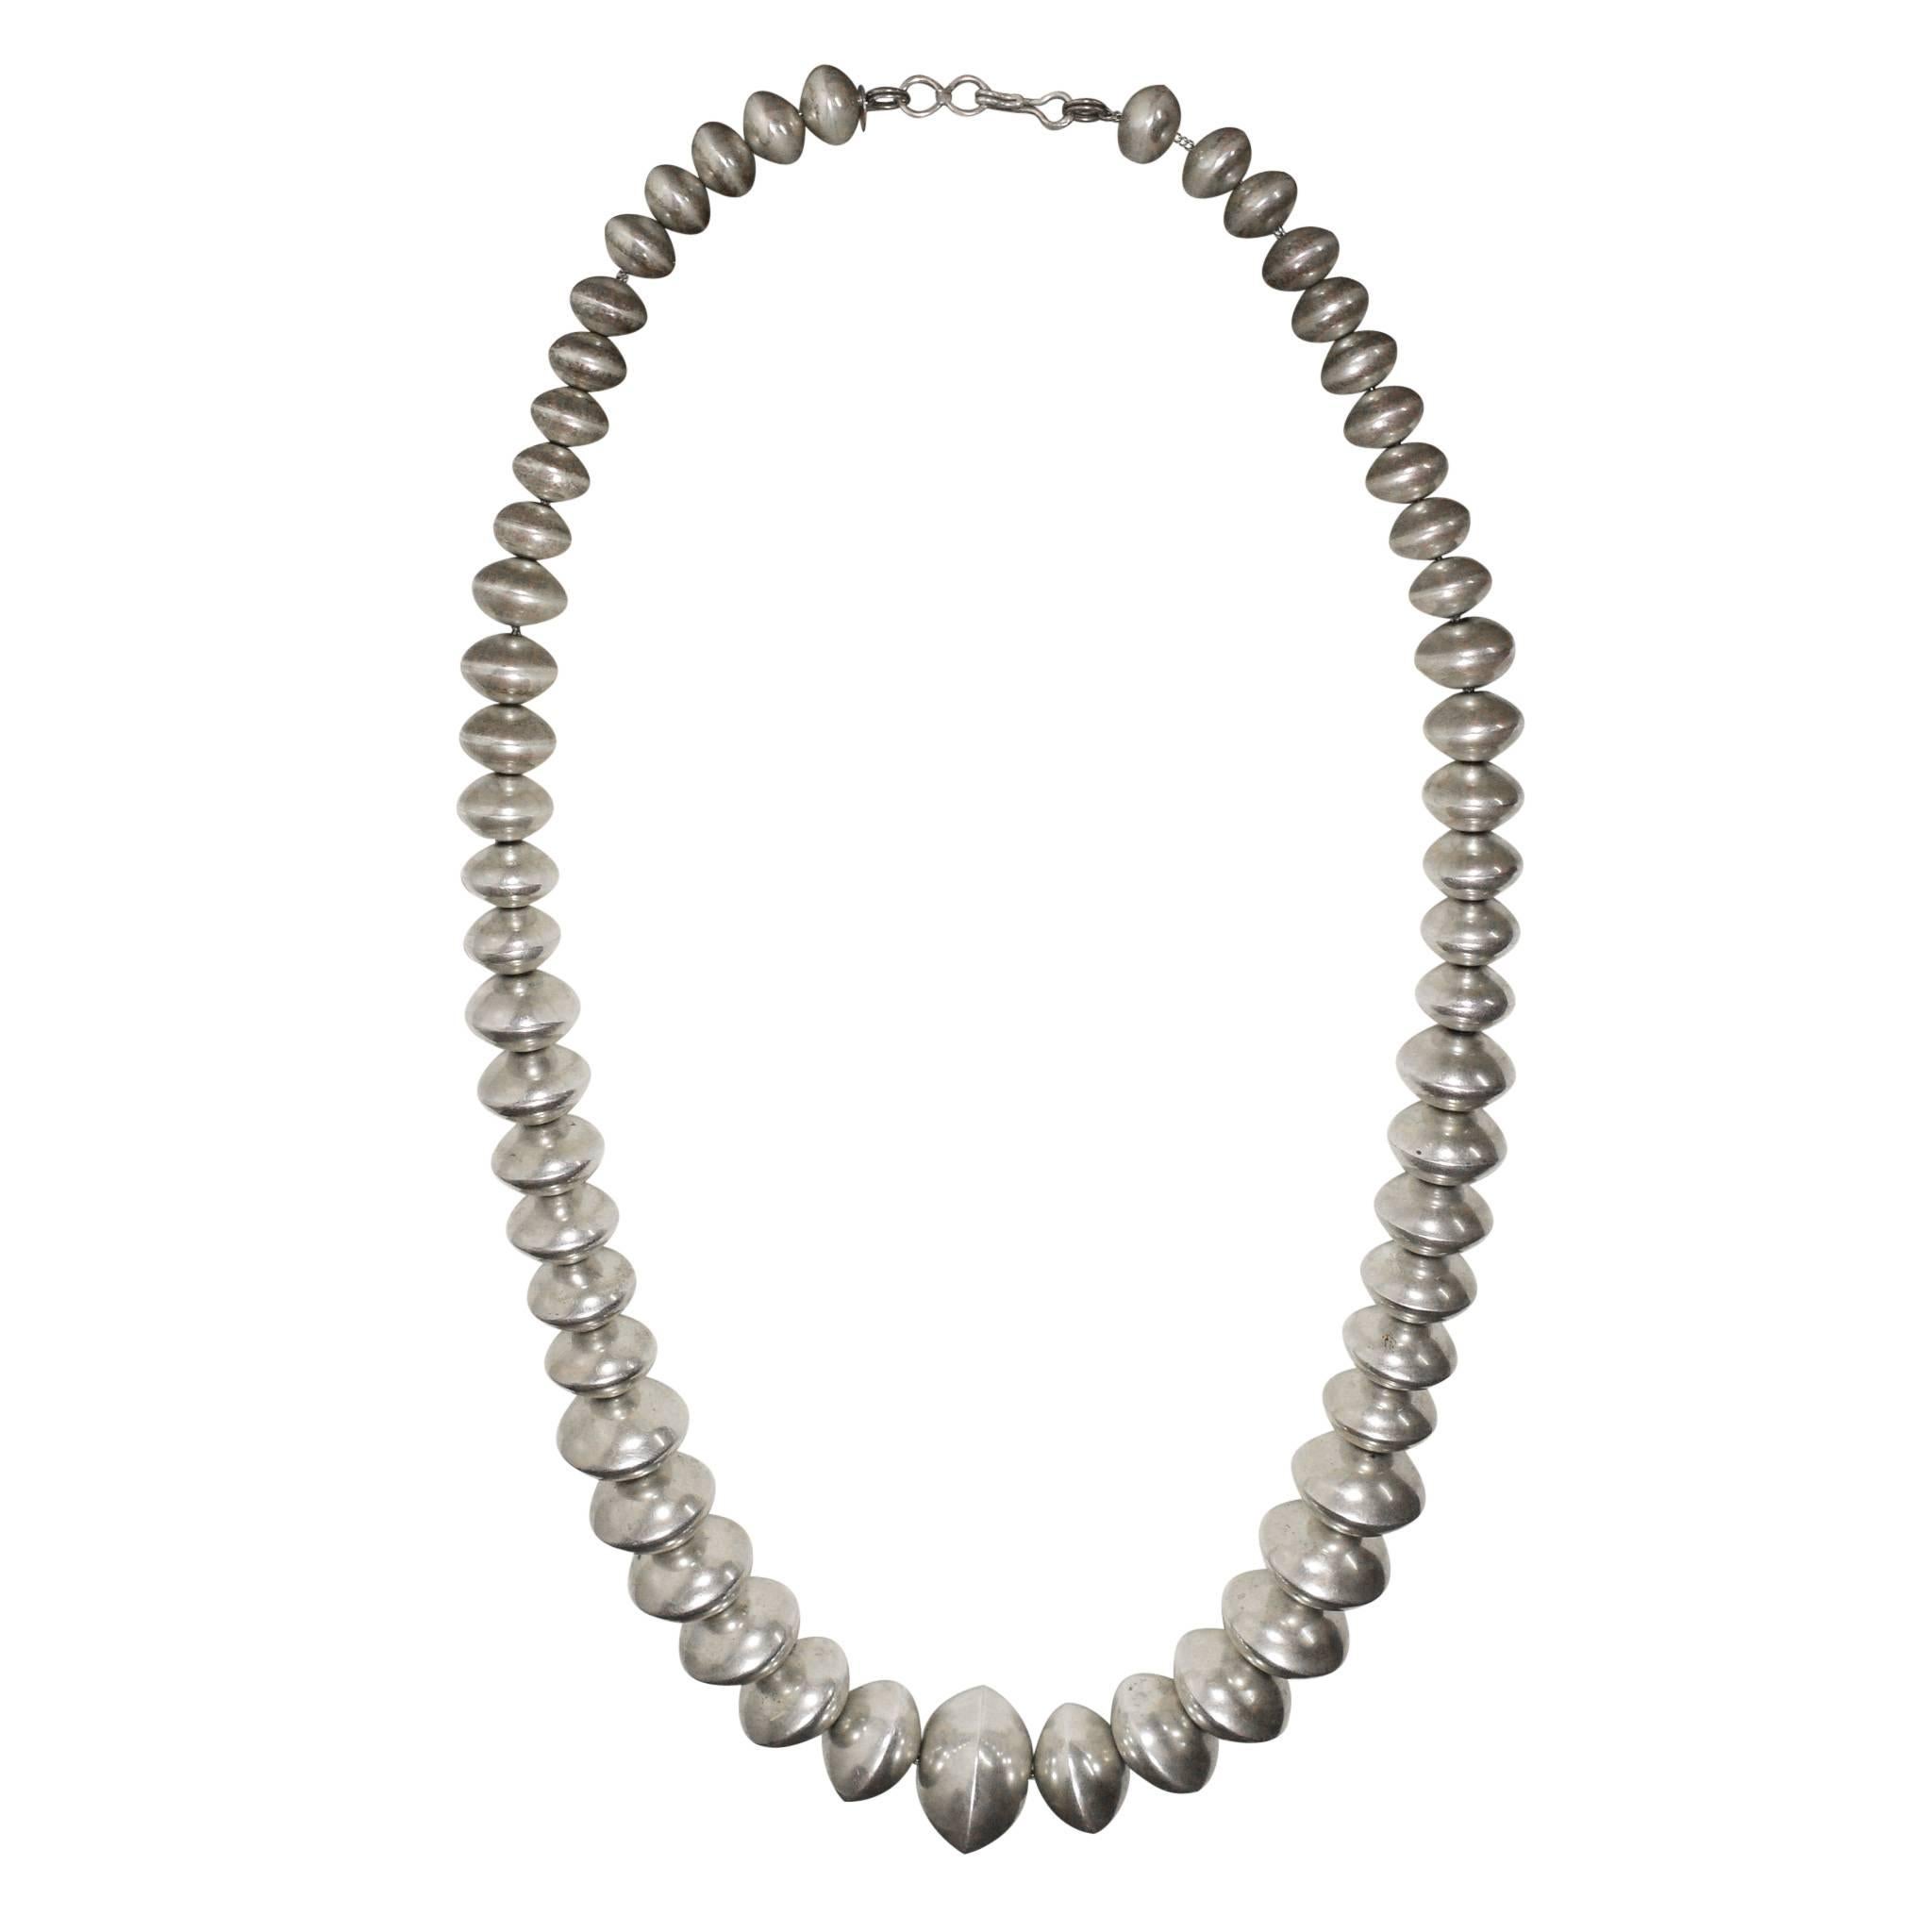 1960s Silver "Flying Saucer" Long Bead Necklace